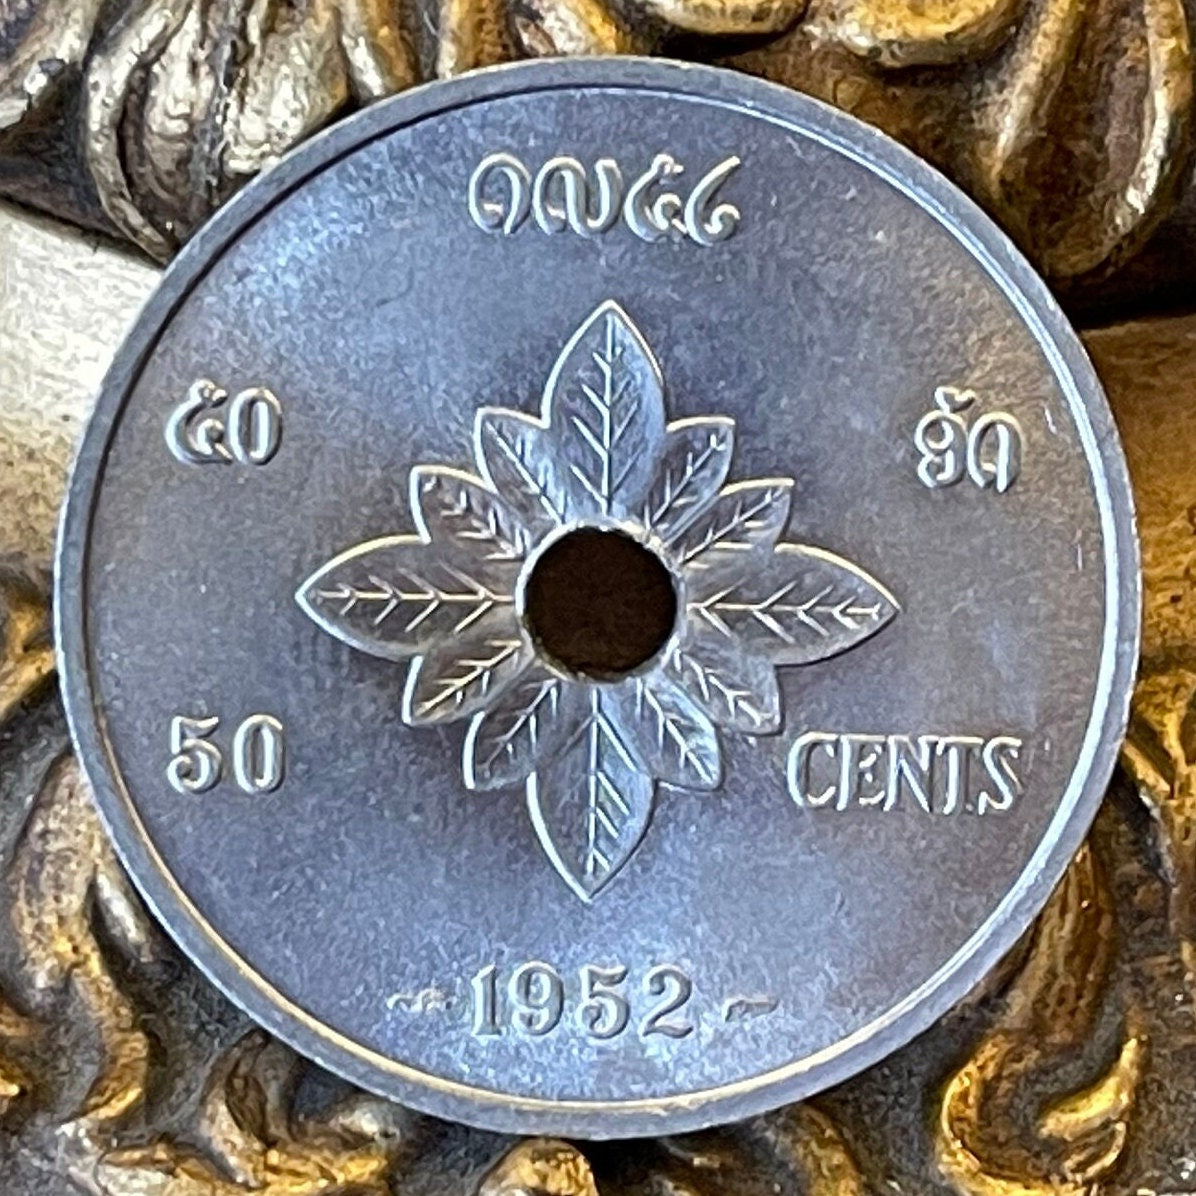 Constitution Book atop Buddhist Almsgiving Bowl 50 Cents Laos Authentic Coin Money for Jewelry (Hole) (Lotus) (Om Enlightenment Symbol) 1952